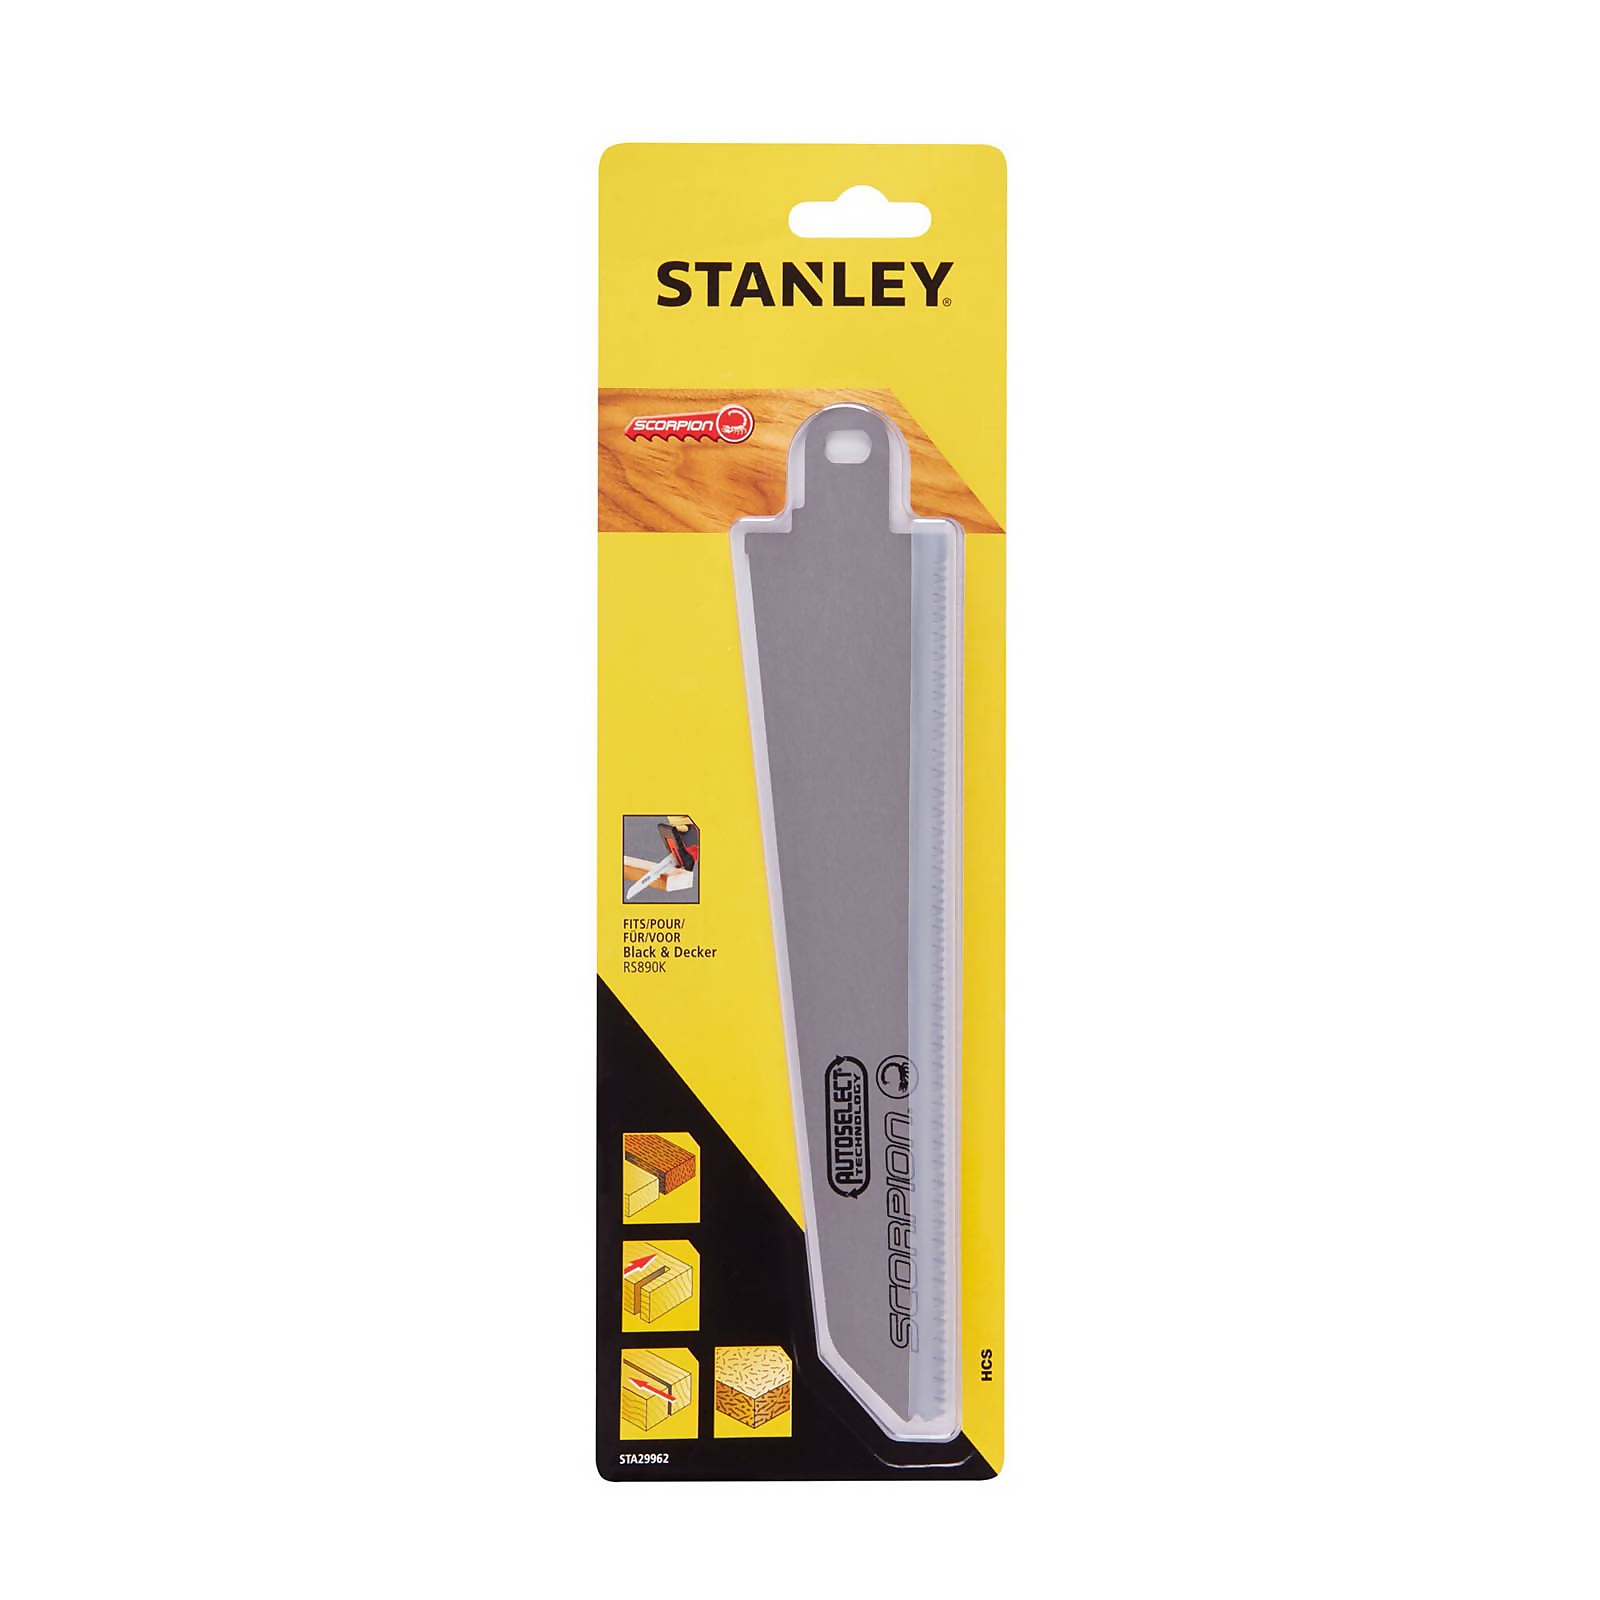 Photo of Stanley Scorpion Saw Blade - Compatible With Rs890k-gb -sta29962-xj-